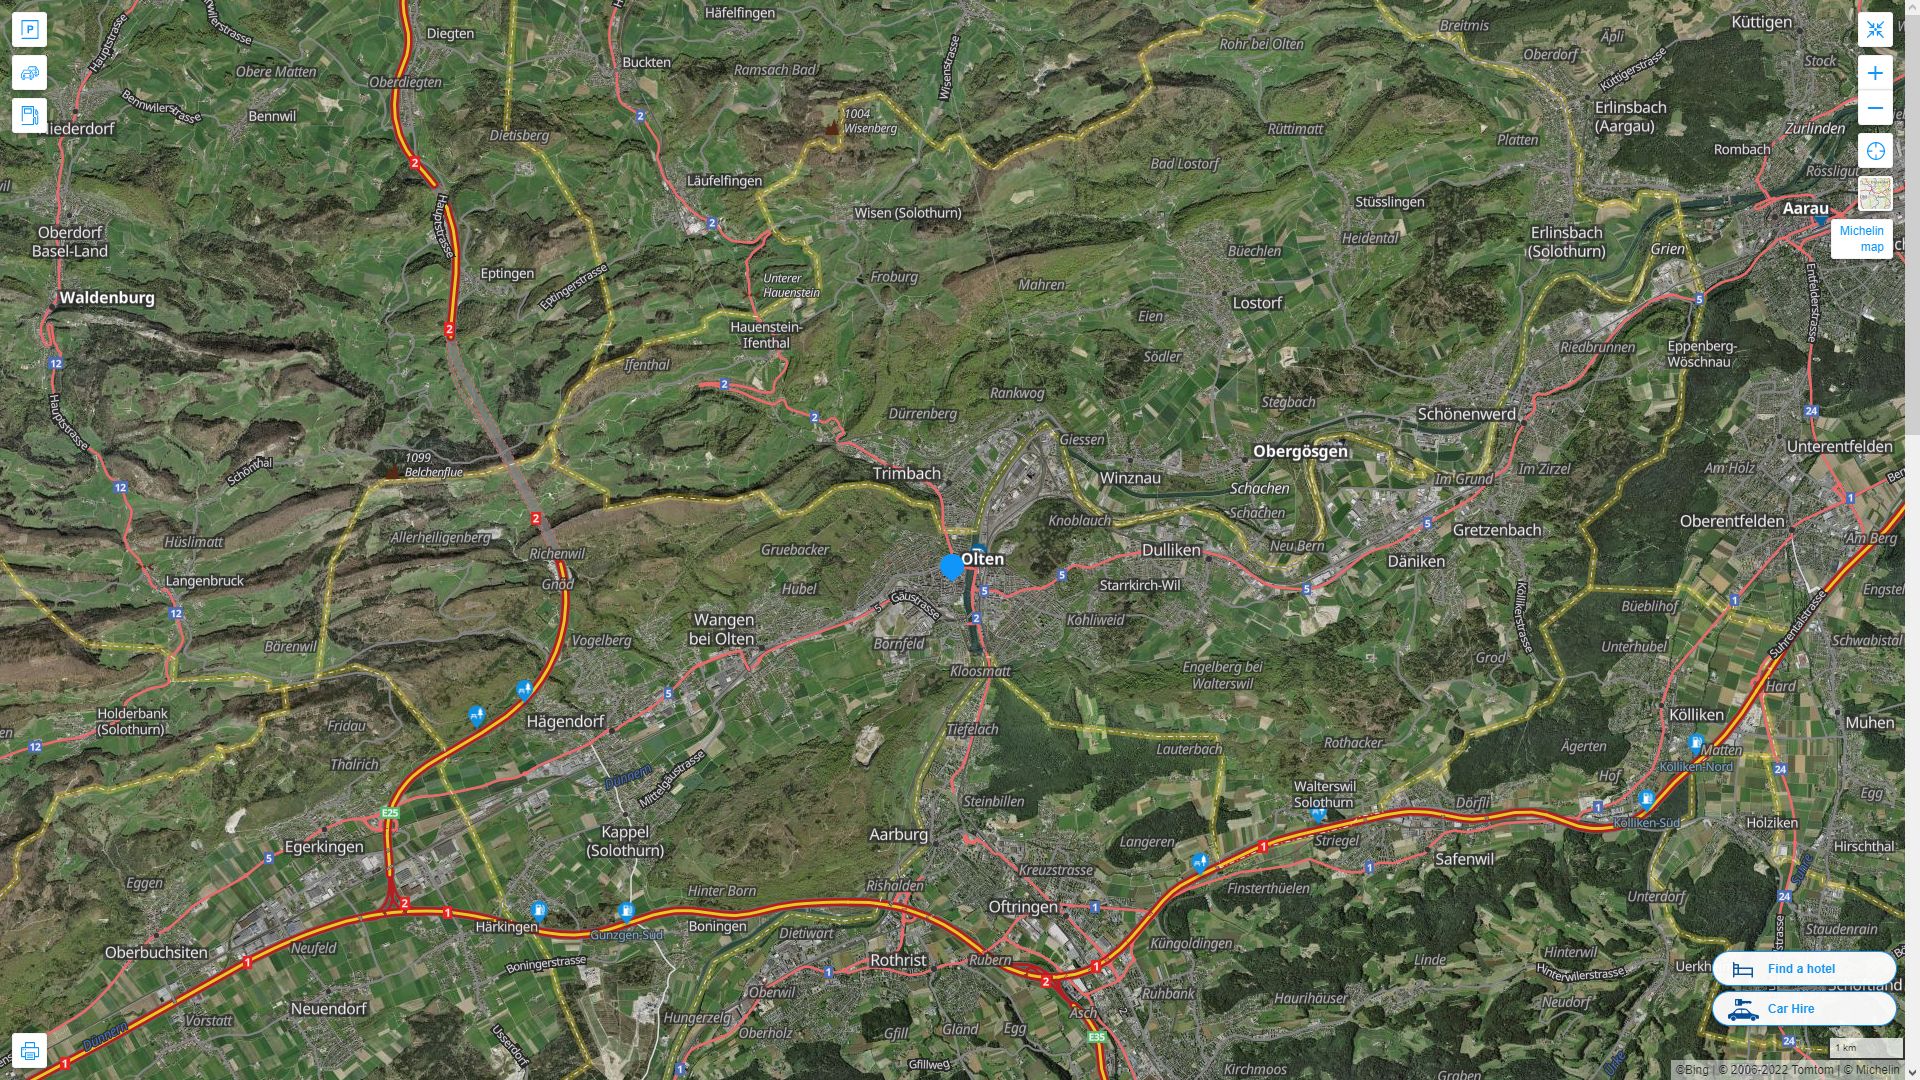 Olten Highway and Road Map with Satellite View